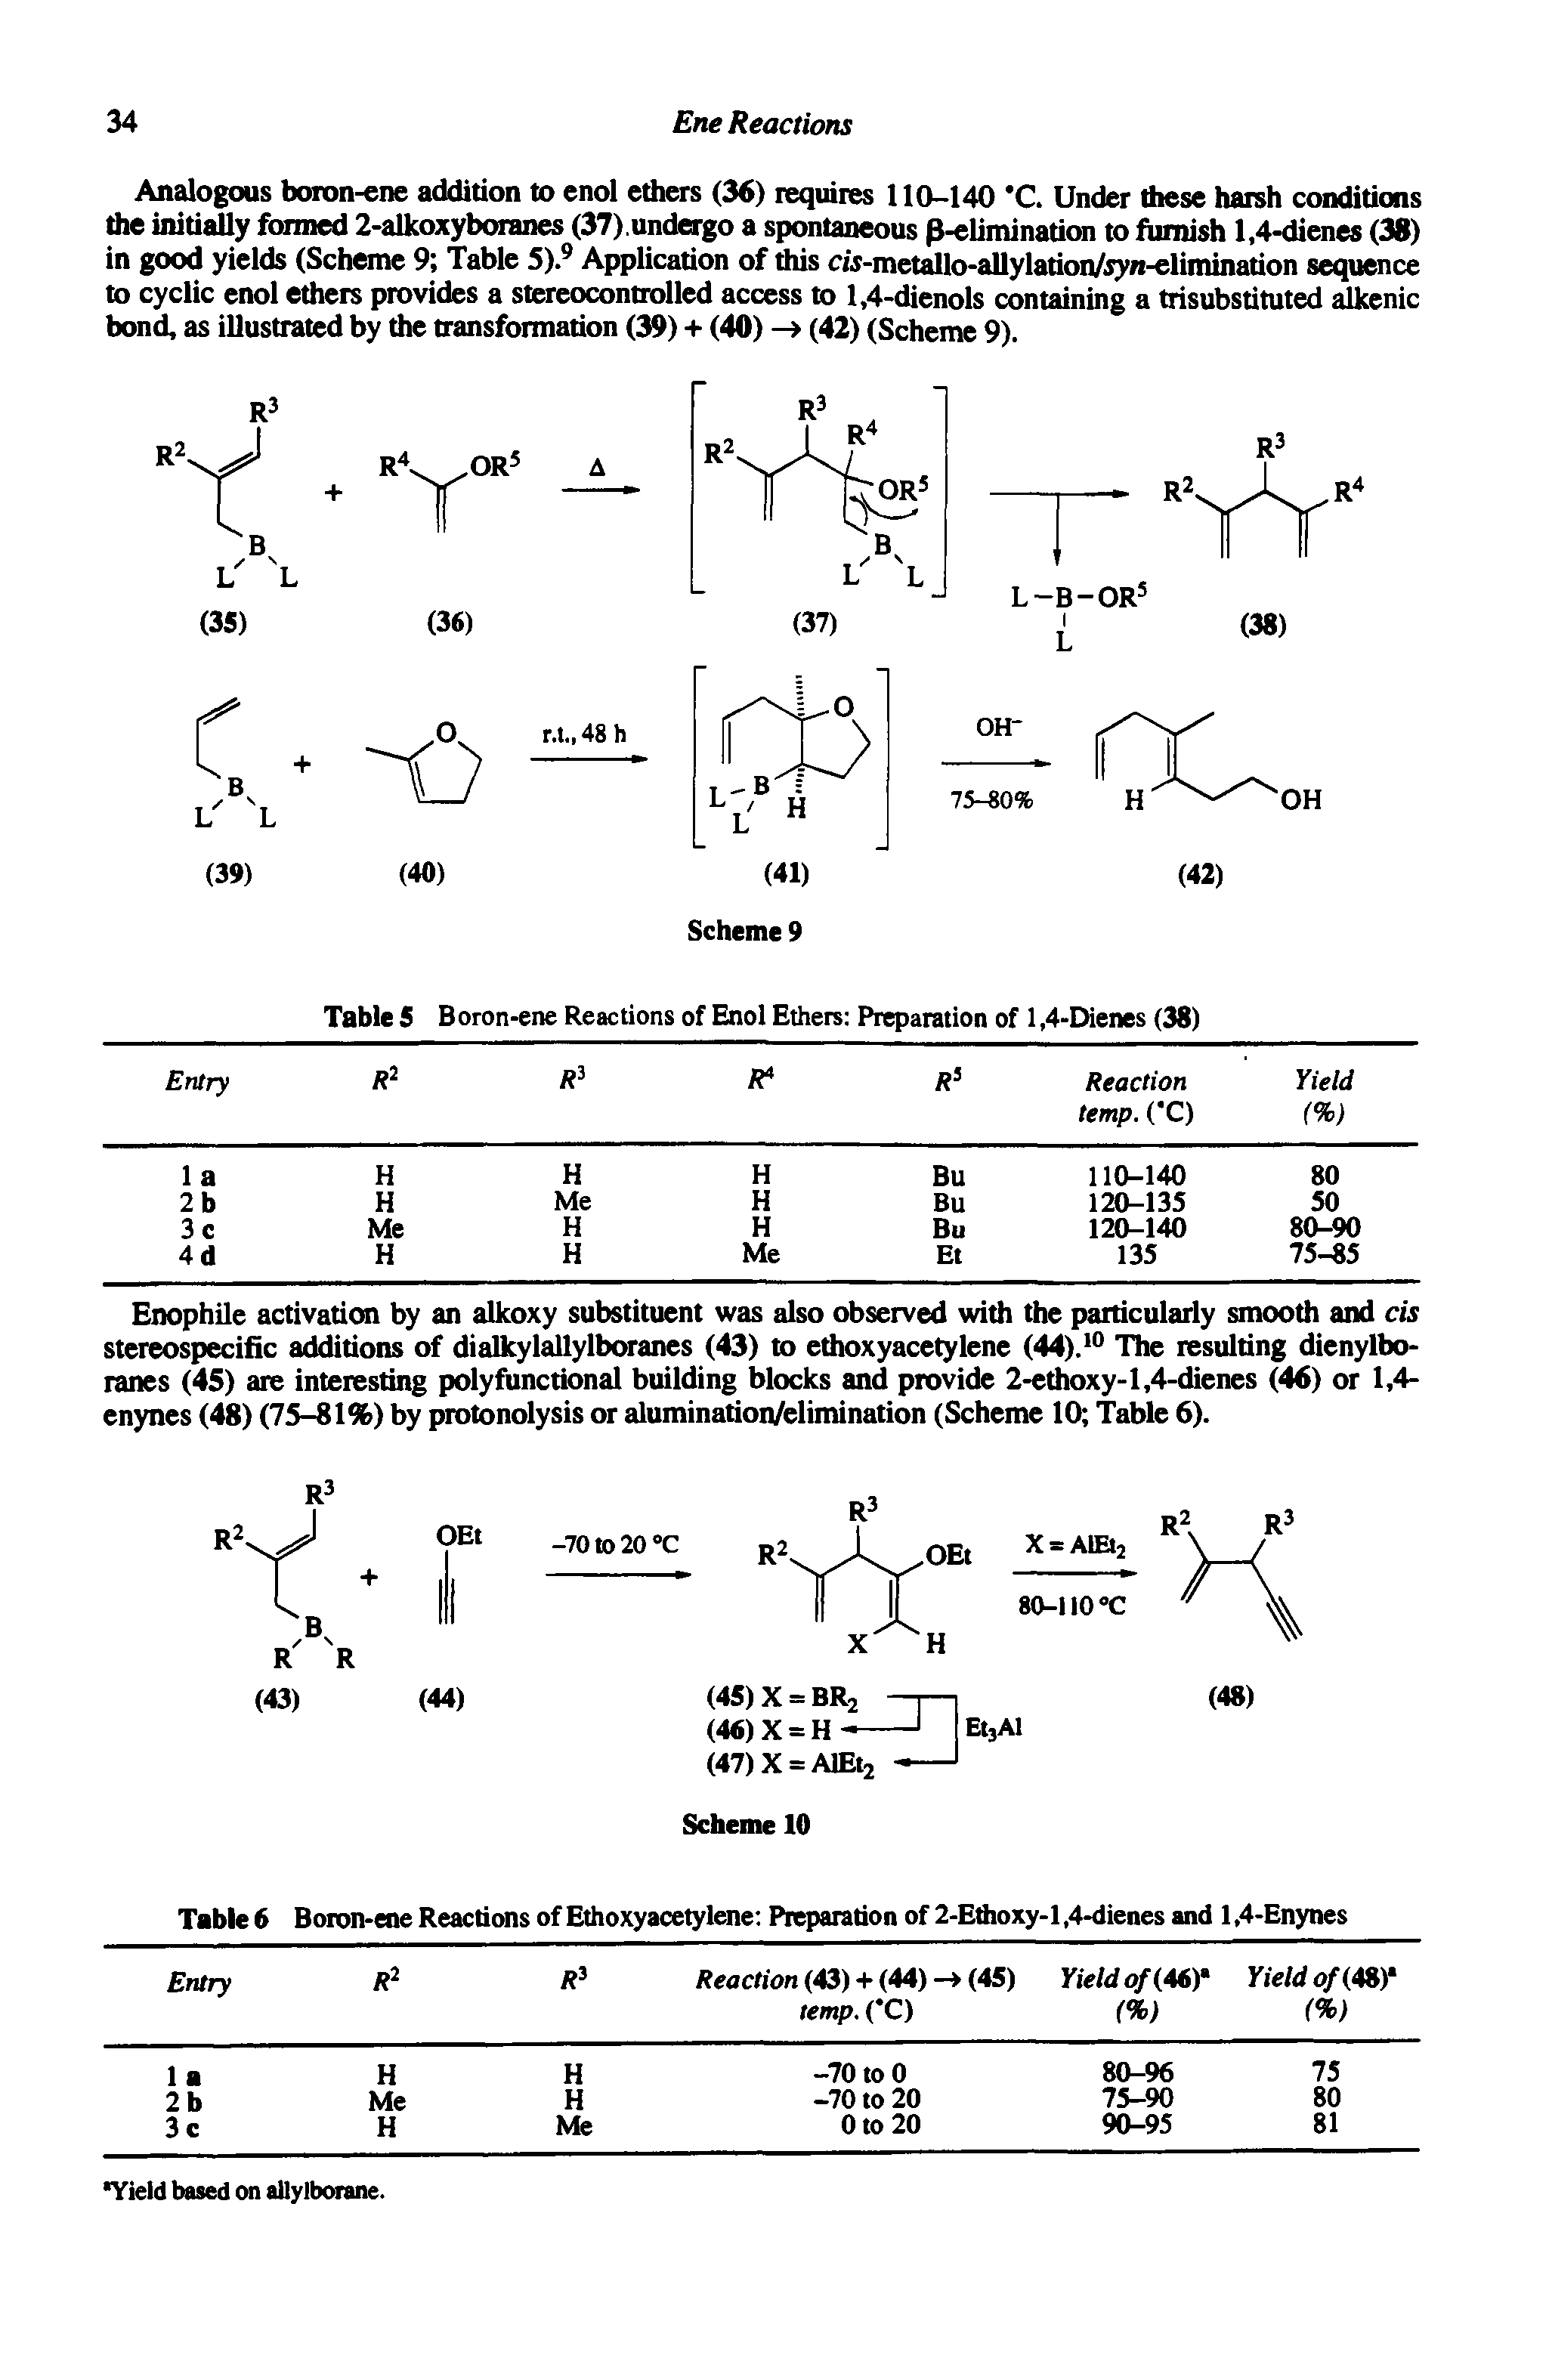 Table 6 Boron-ene Reactions of Ethoxyacetylene Preparation of 2-Etfaoxy-l, 4-dienes and 1,4-Enynes...